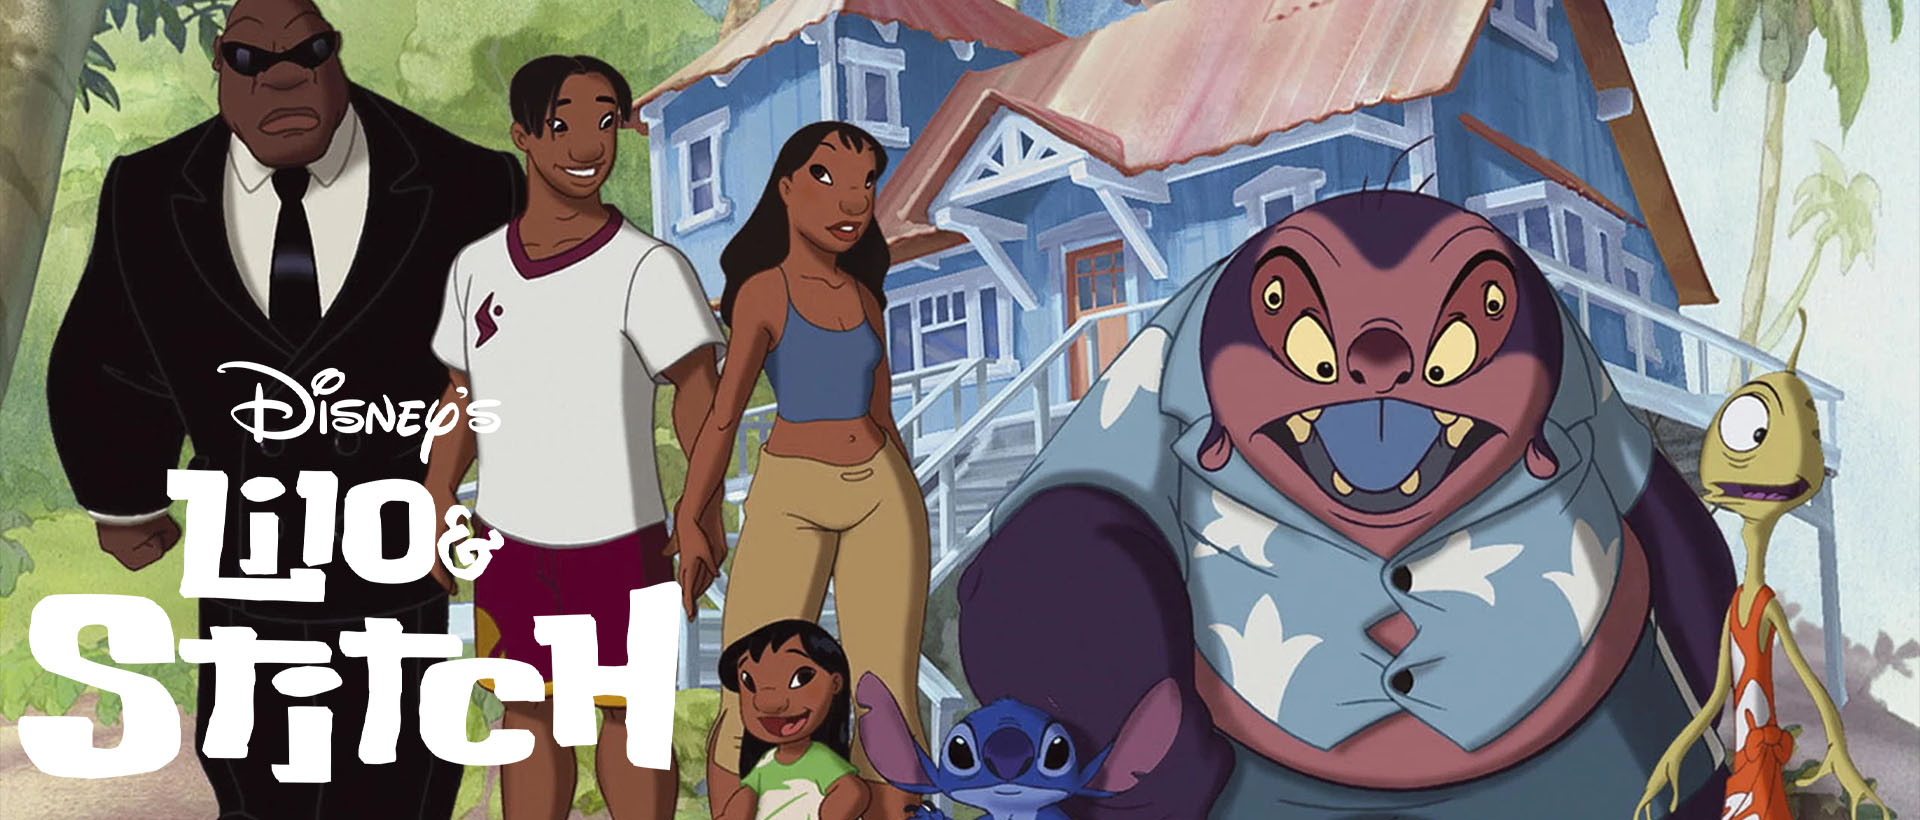 lilo stitch animated full character banner